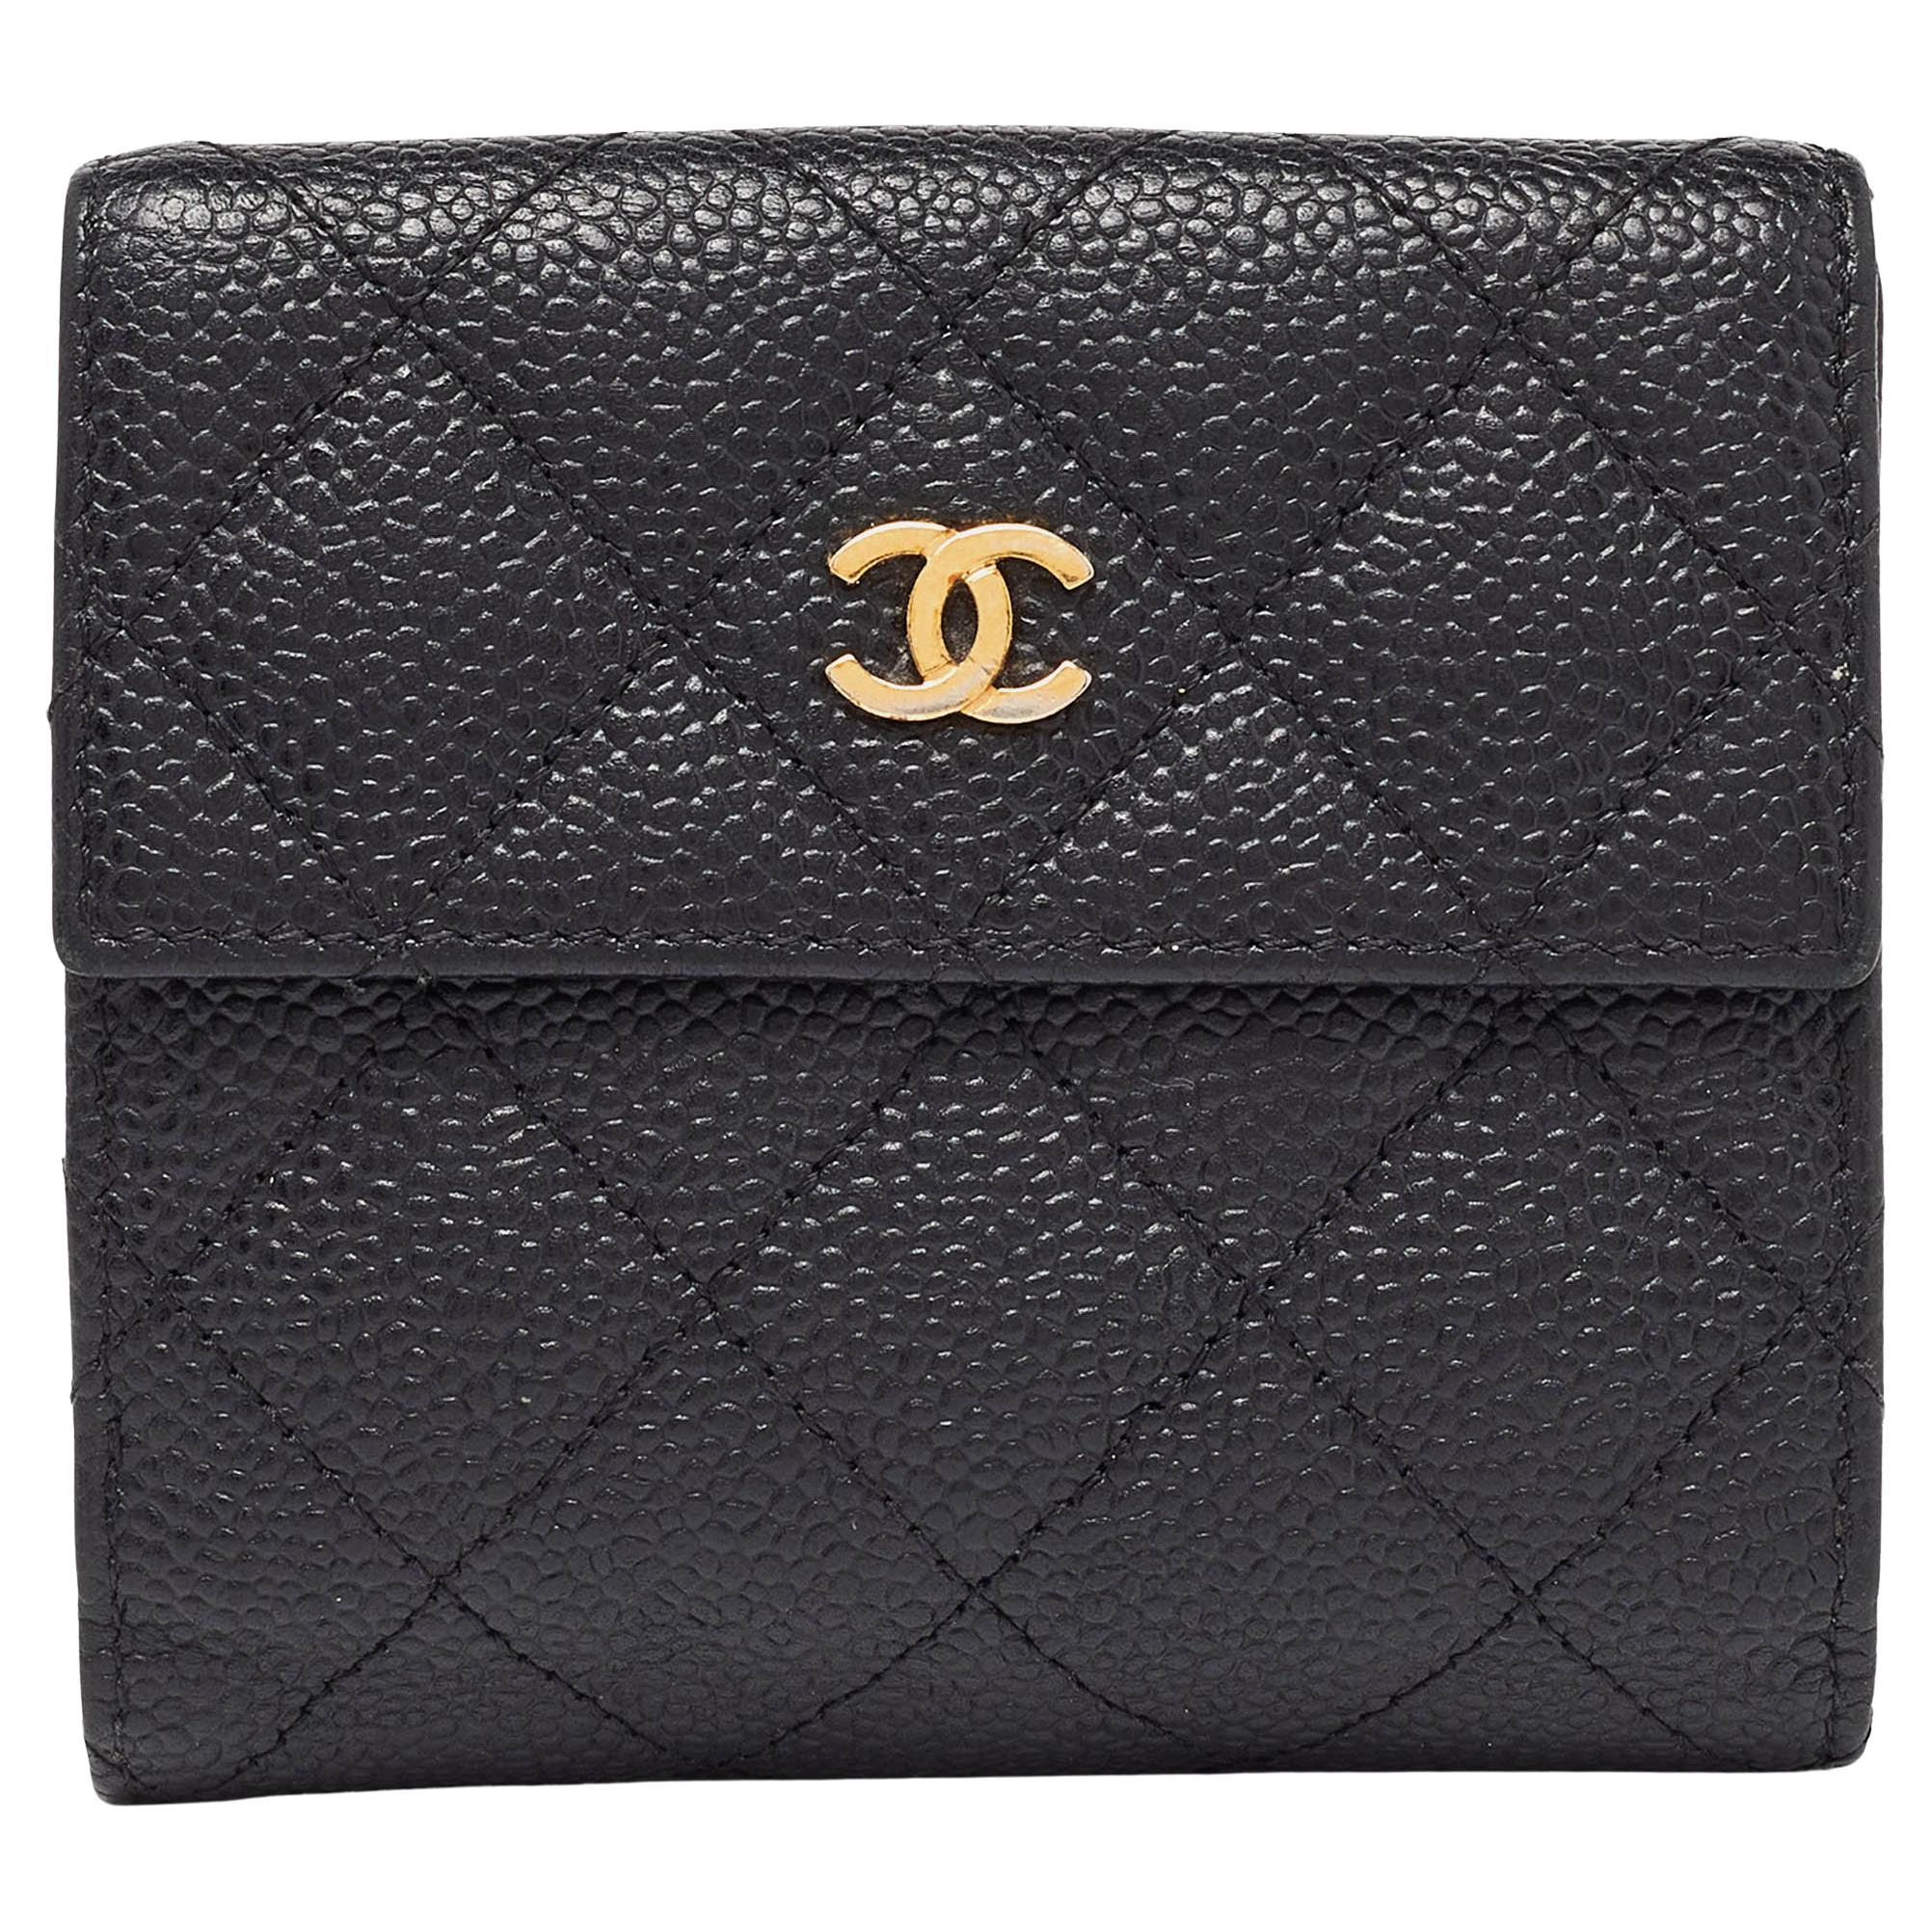 Chanel Black Caviar Leather CC Small Flap Wallet For Sale